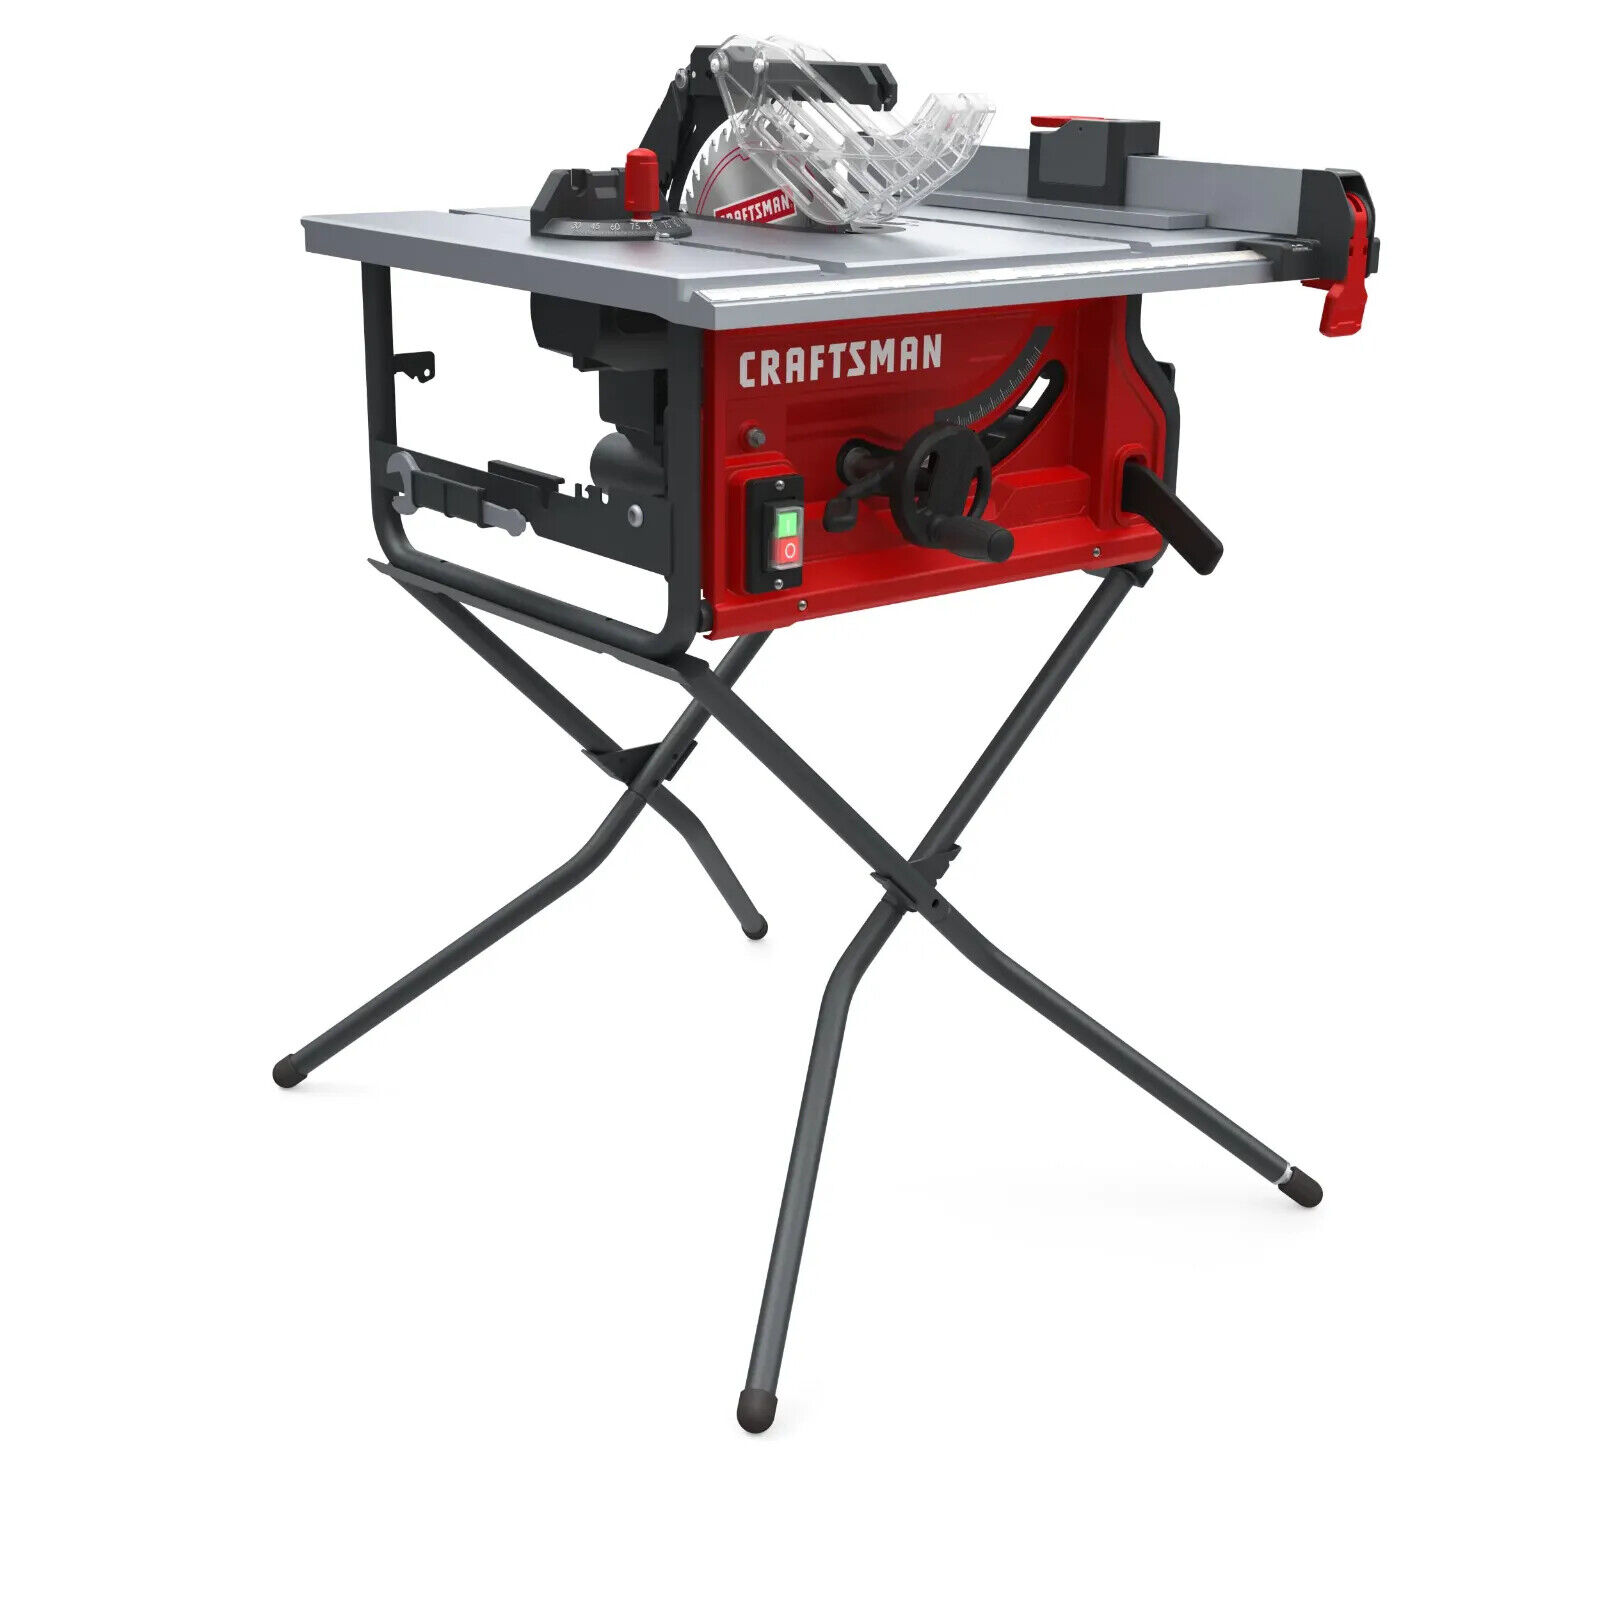 CRAFTSMAN 10-in Carbide-Tipped Blade 15-Amp Table Saw